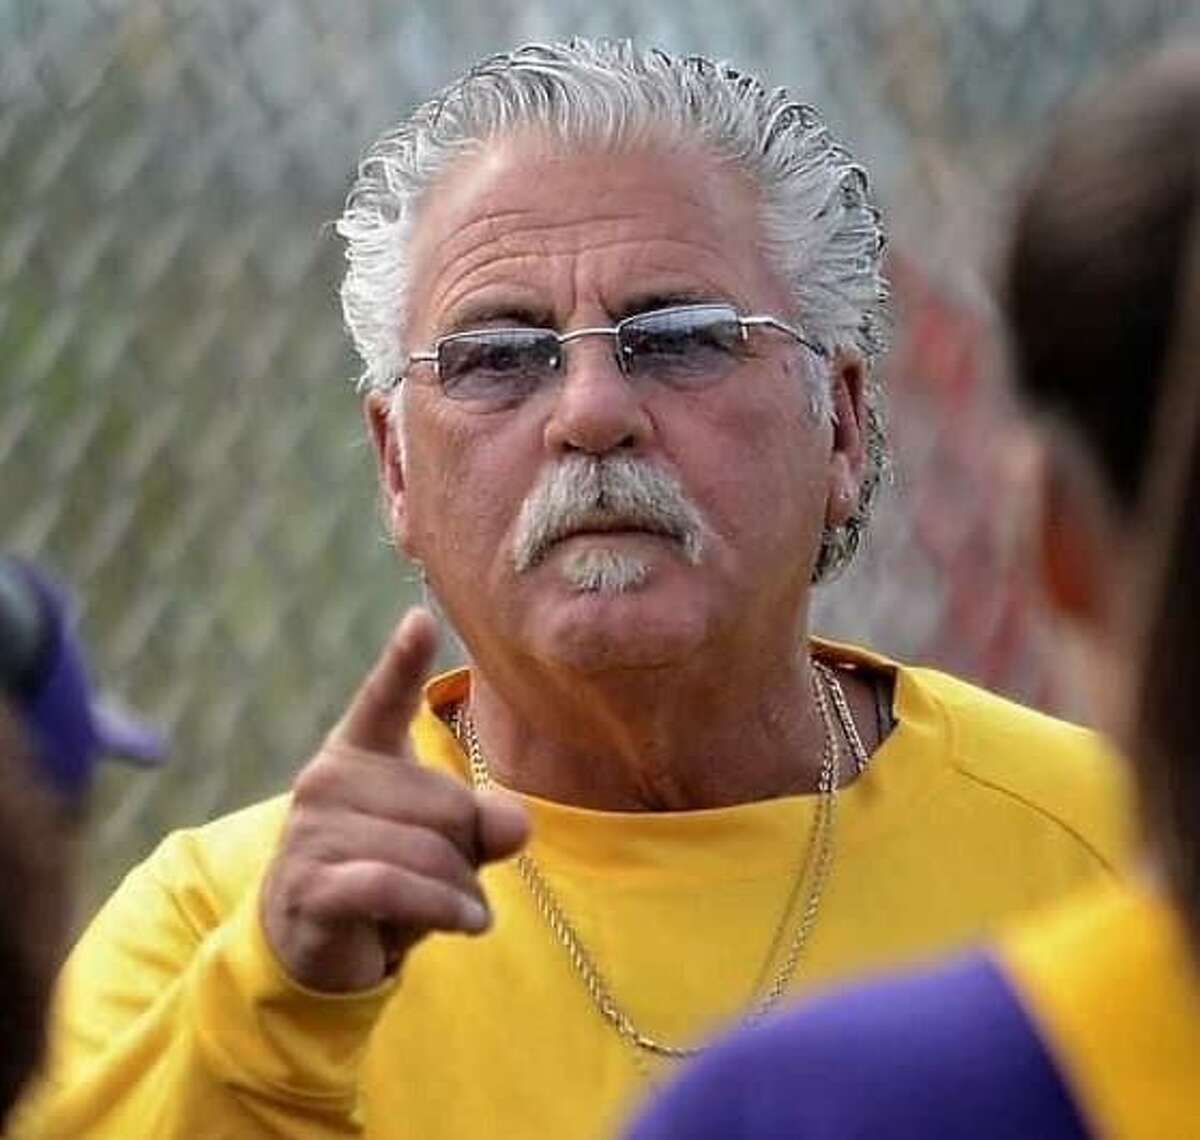 Ron Rosarbo of New Haven, the former Career softball coach, will receive the Tony Mentone Memorial Distinguished Service Award, from the Southern Connecticut Diamond Club on Oct. 6.